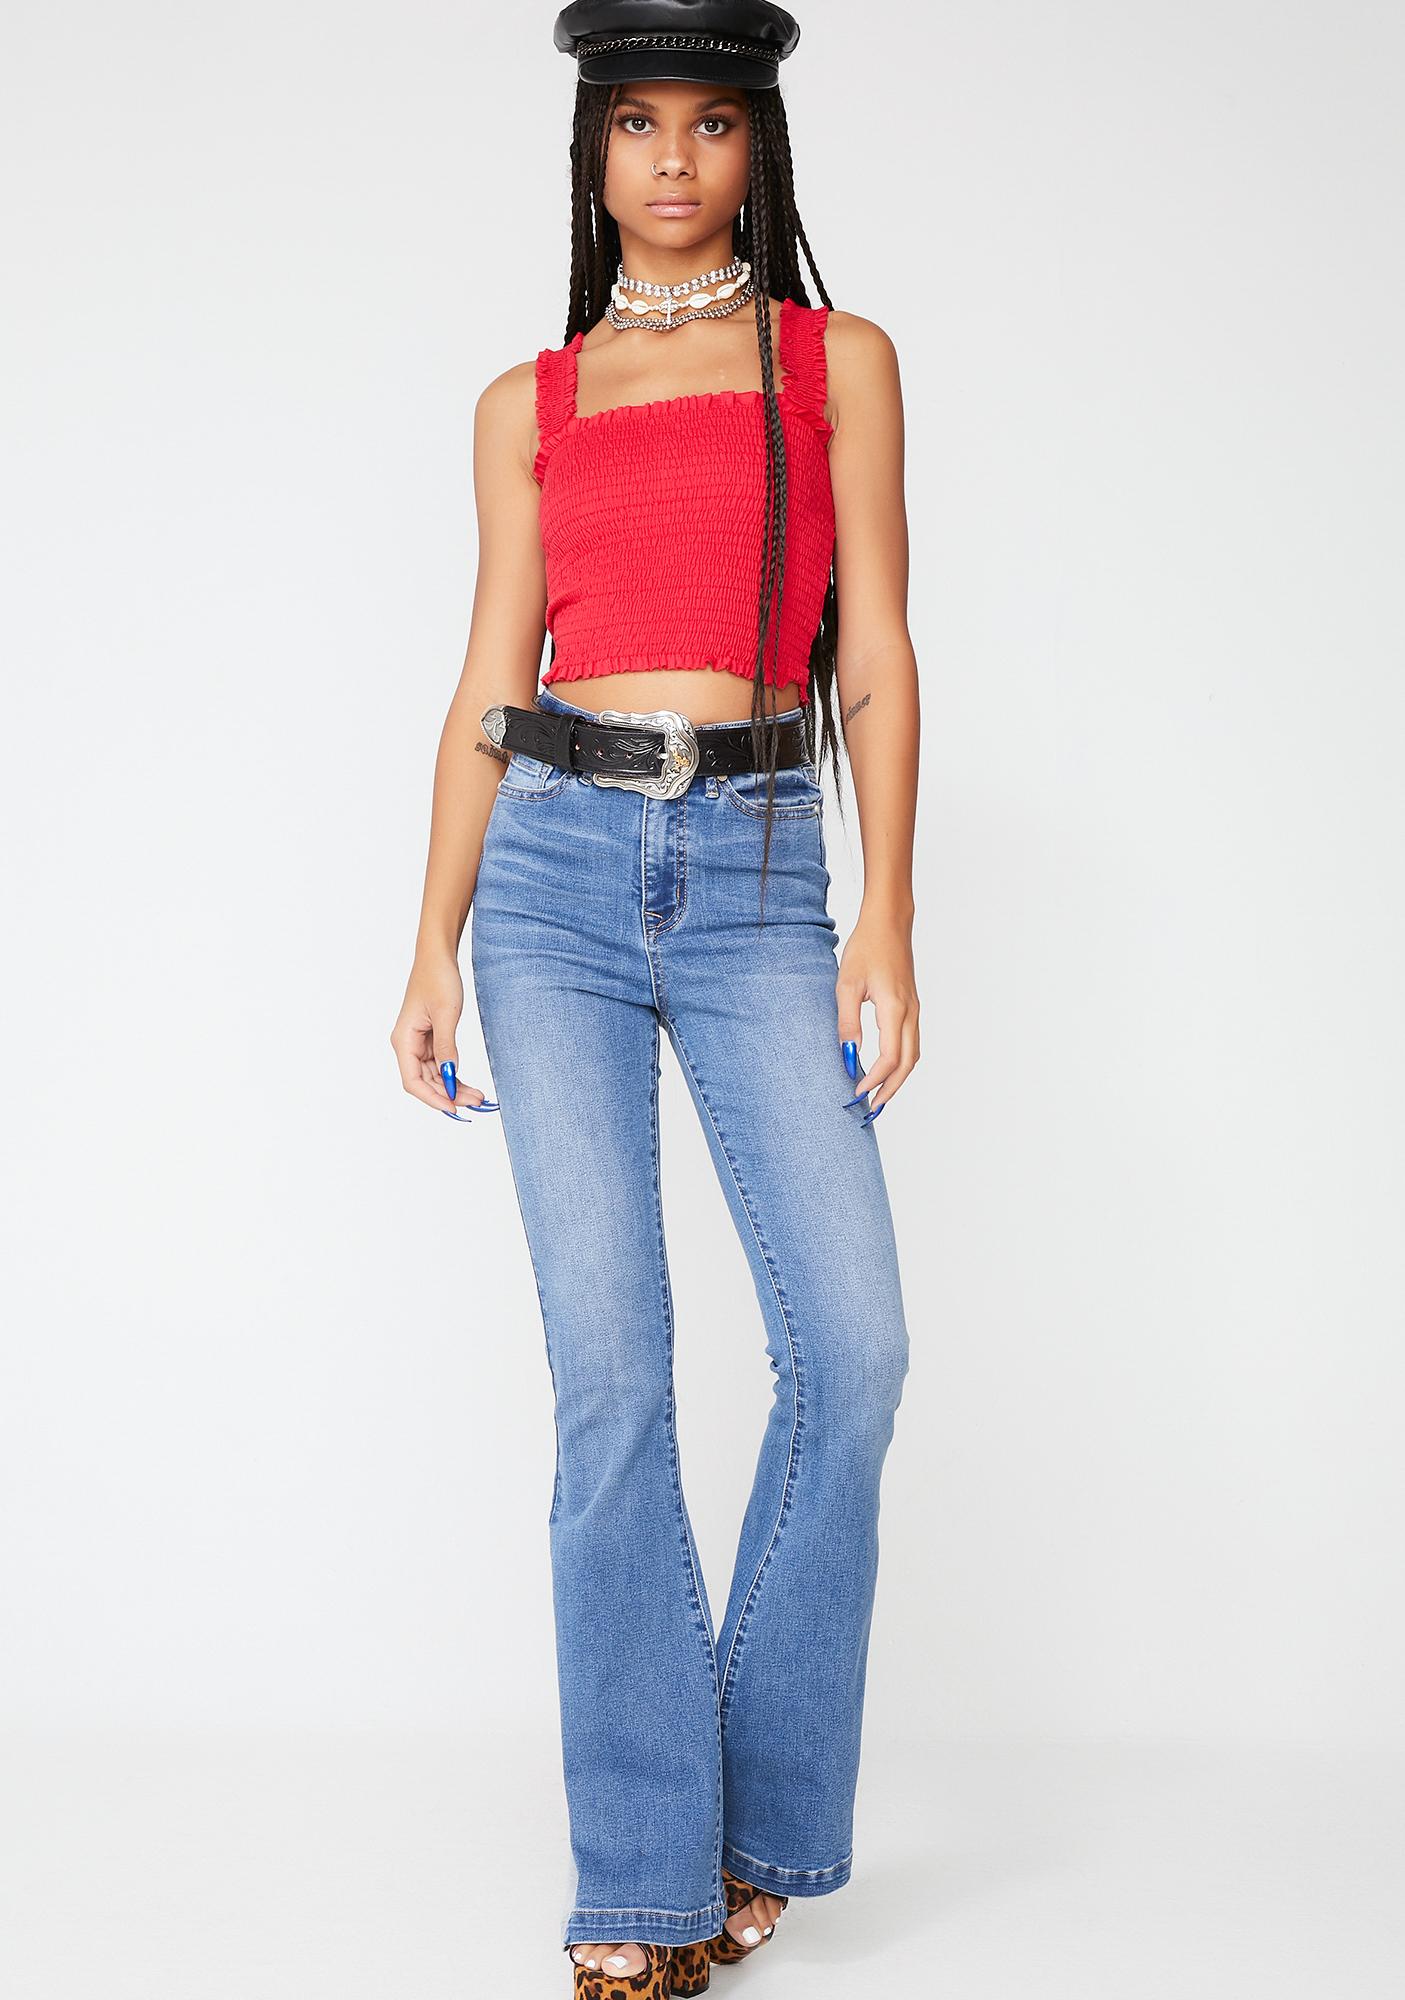 Red Smocked Square Neck Crop Top | Dolls Kill